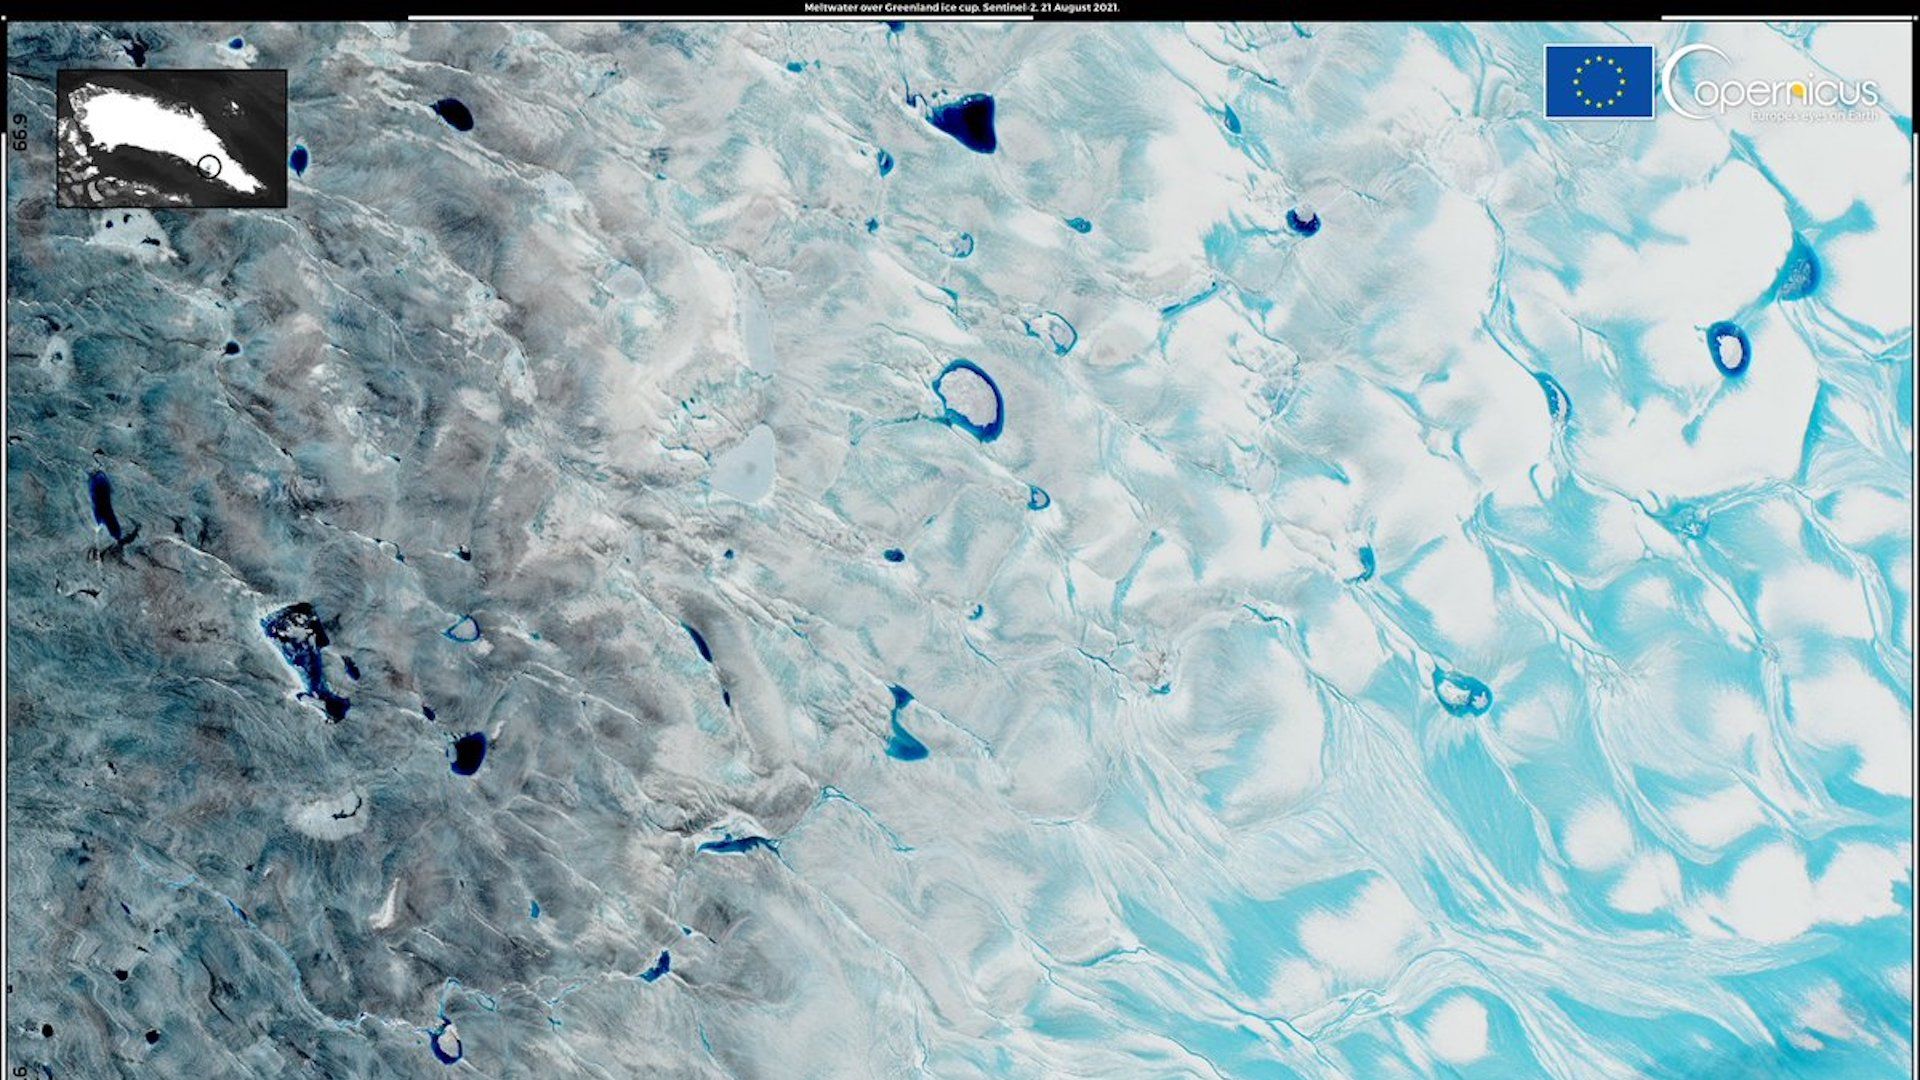 Satellite photo showing blue and white ice on the Greenland Ice Sheet.